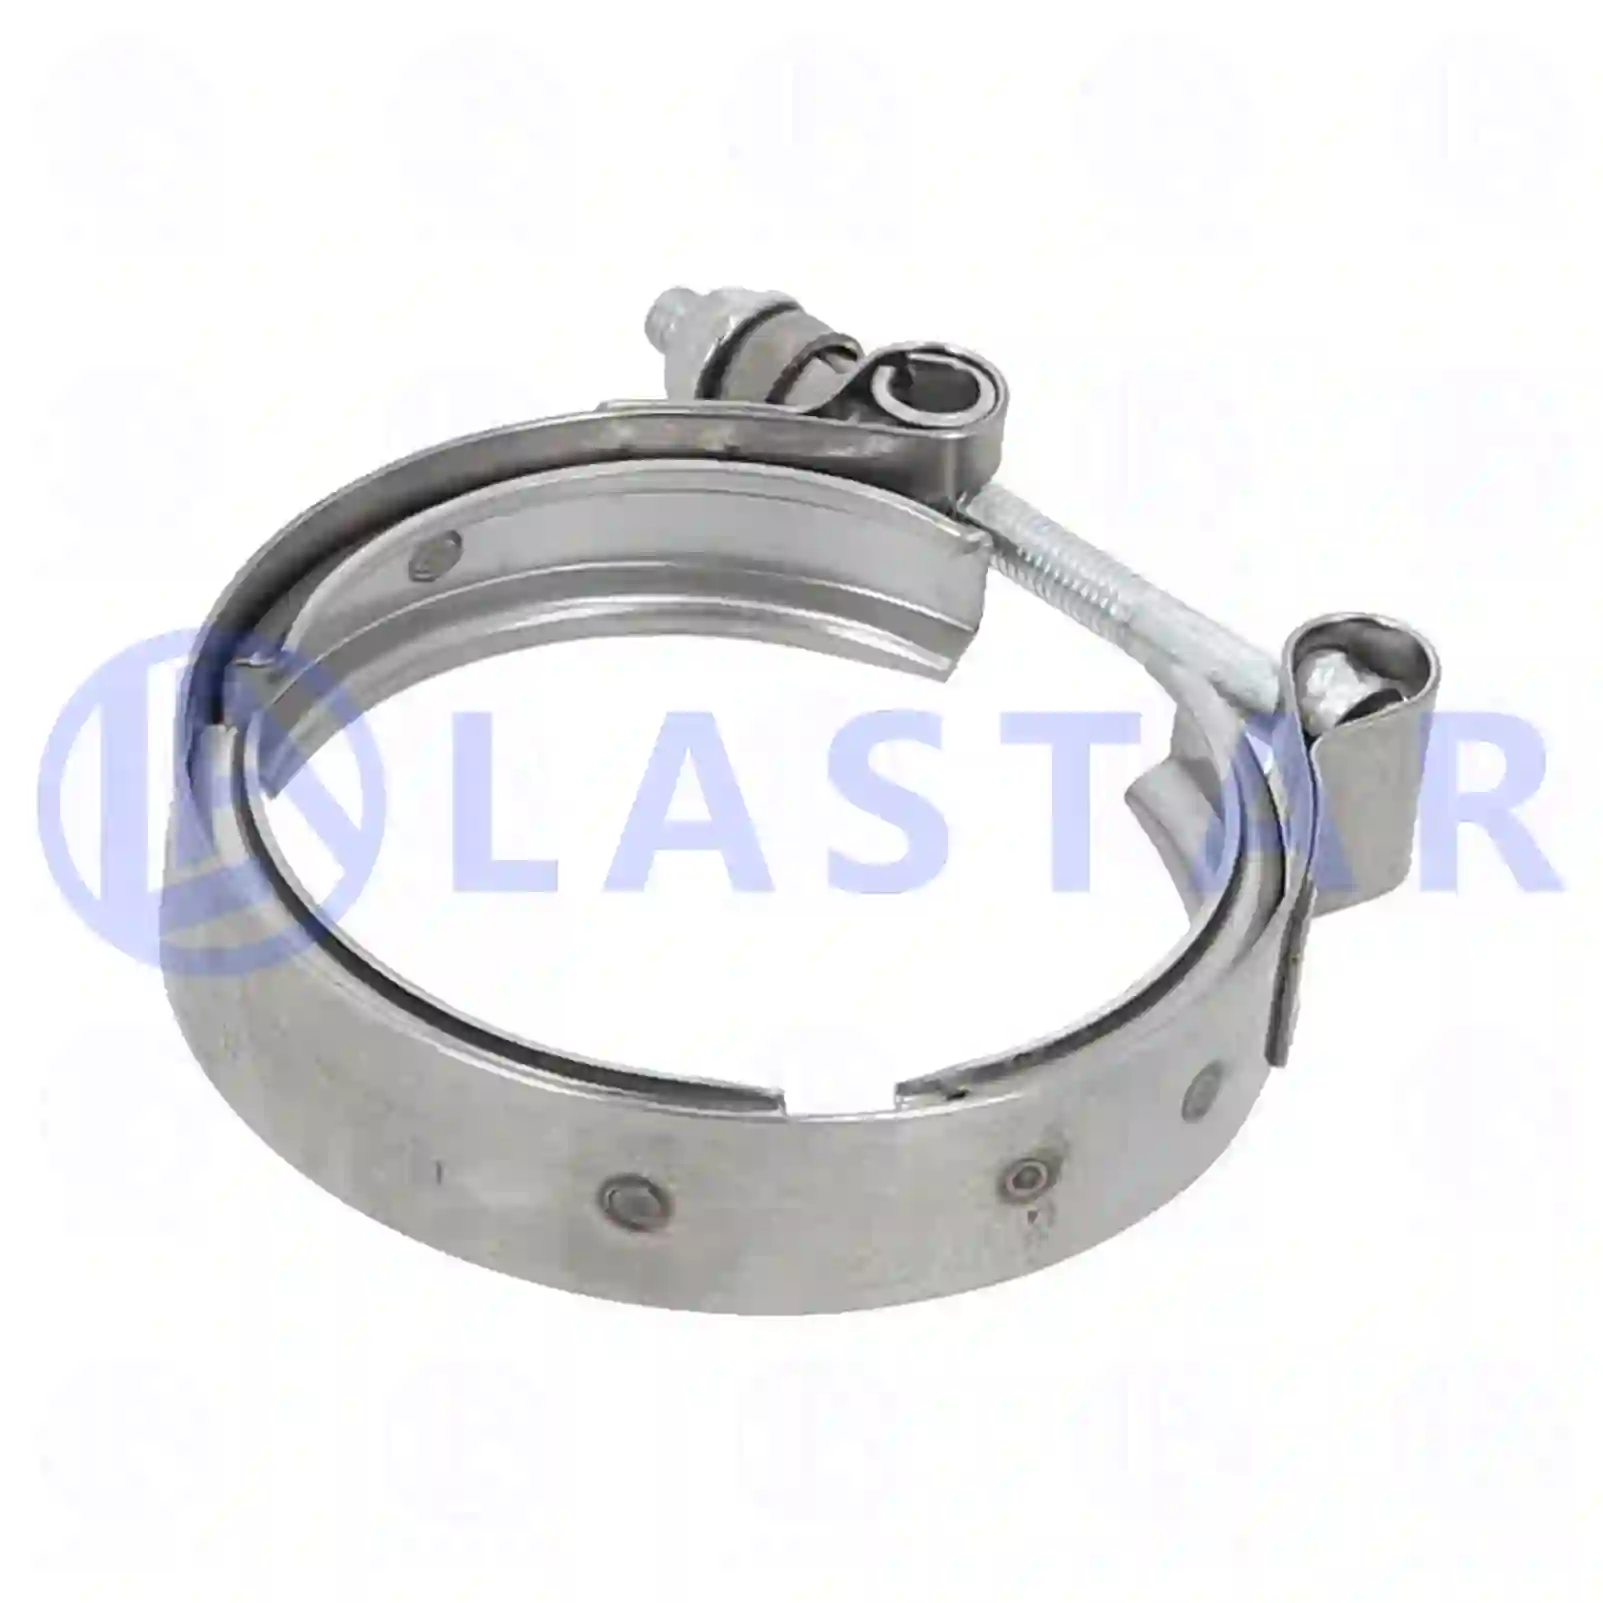  Tensioning clamp || Lastar Spare Part | Truck Spare Parts, Auotomotive Spare Parts